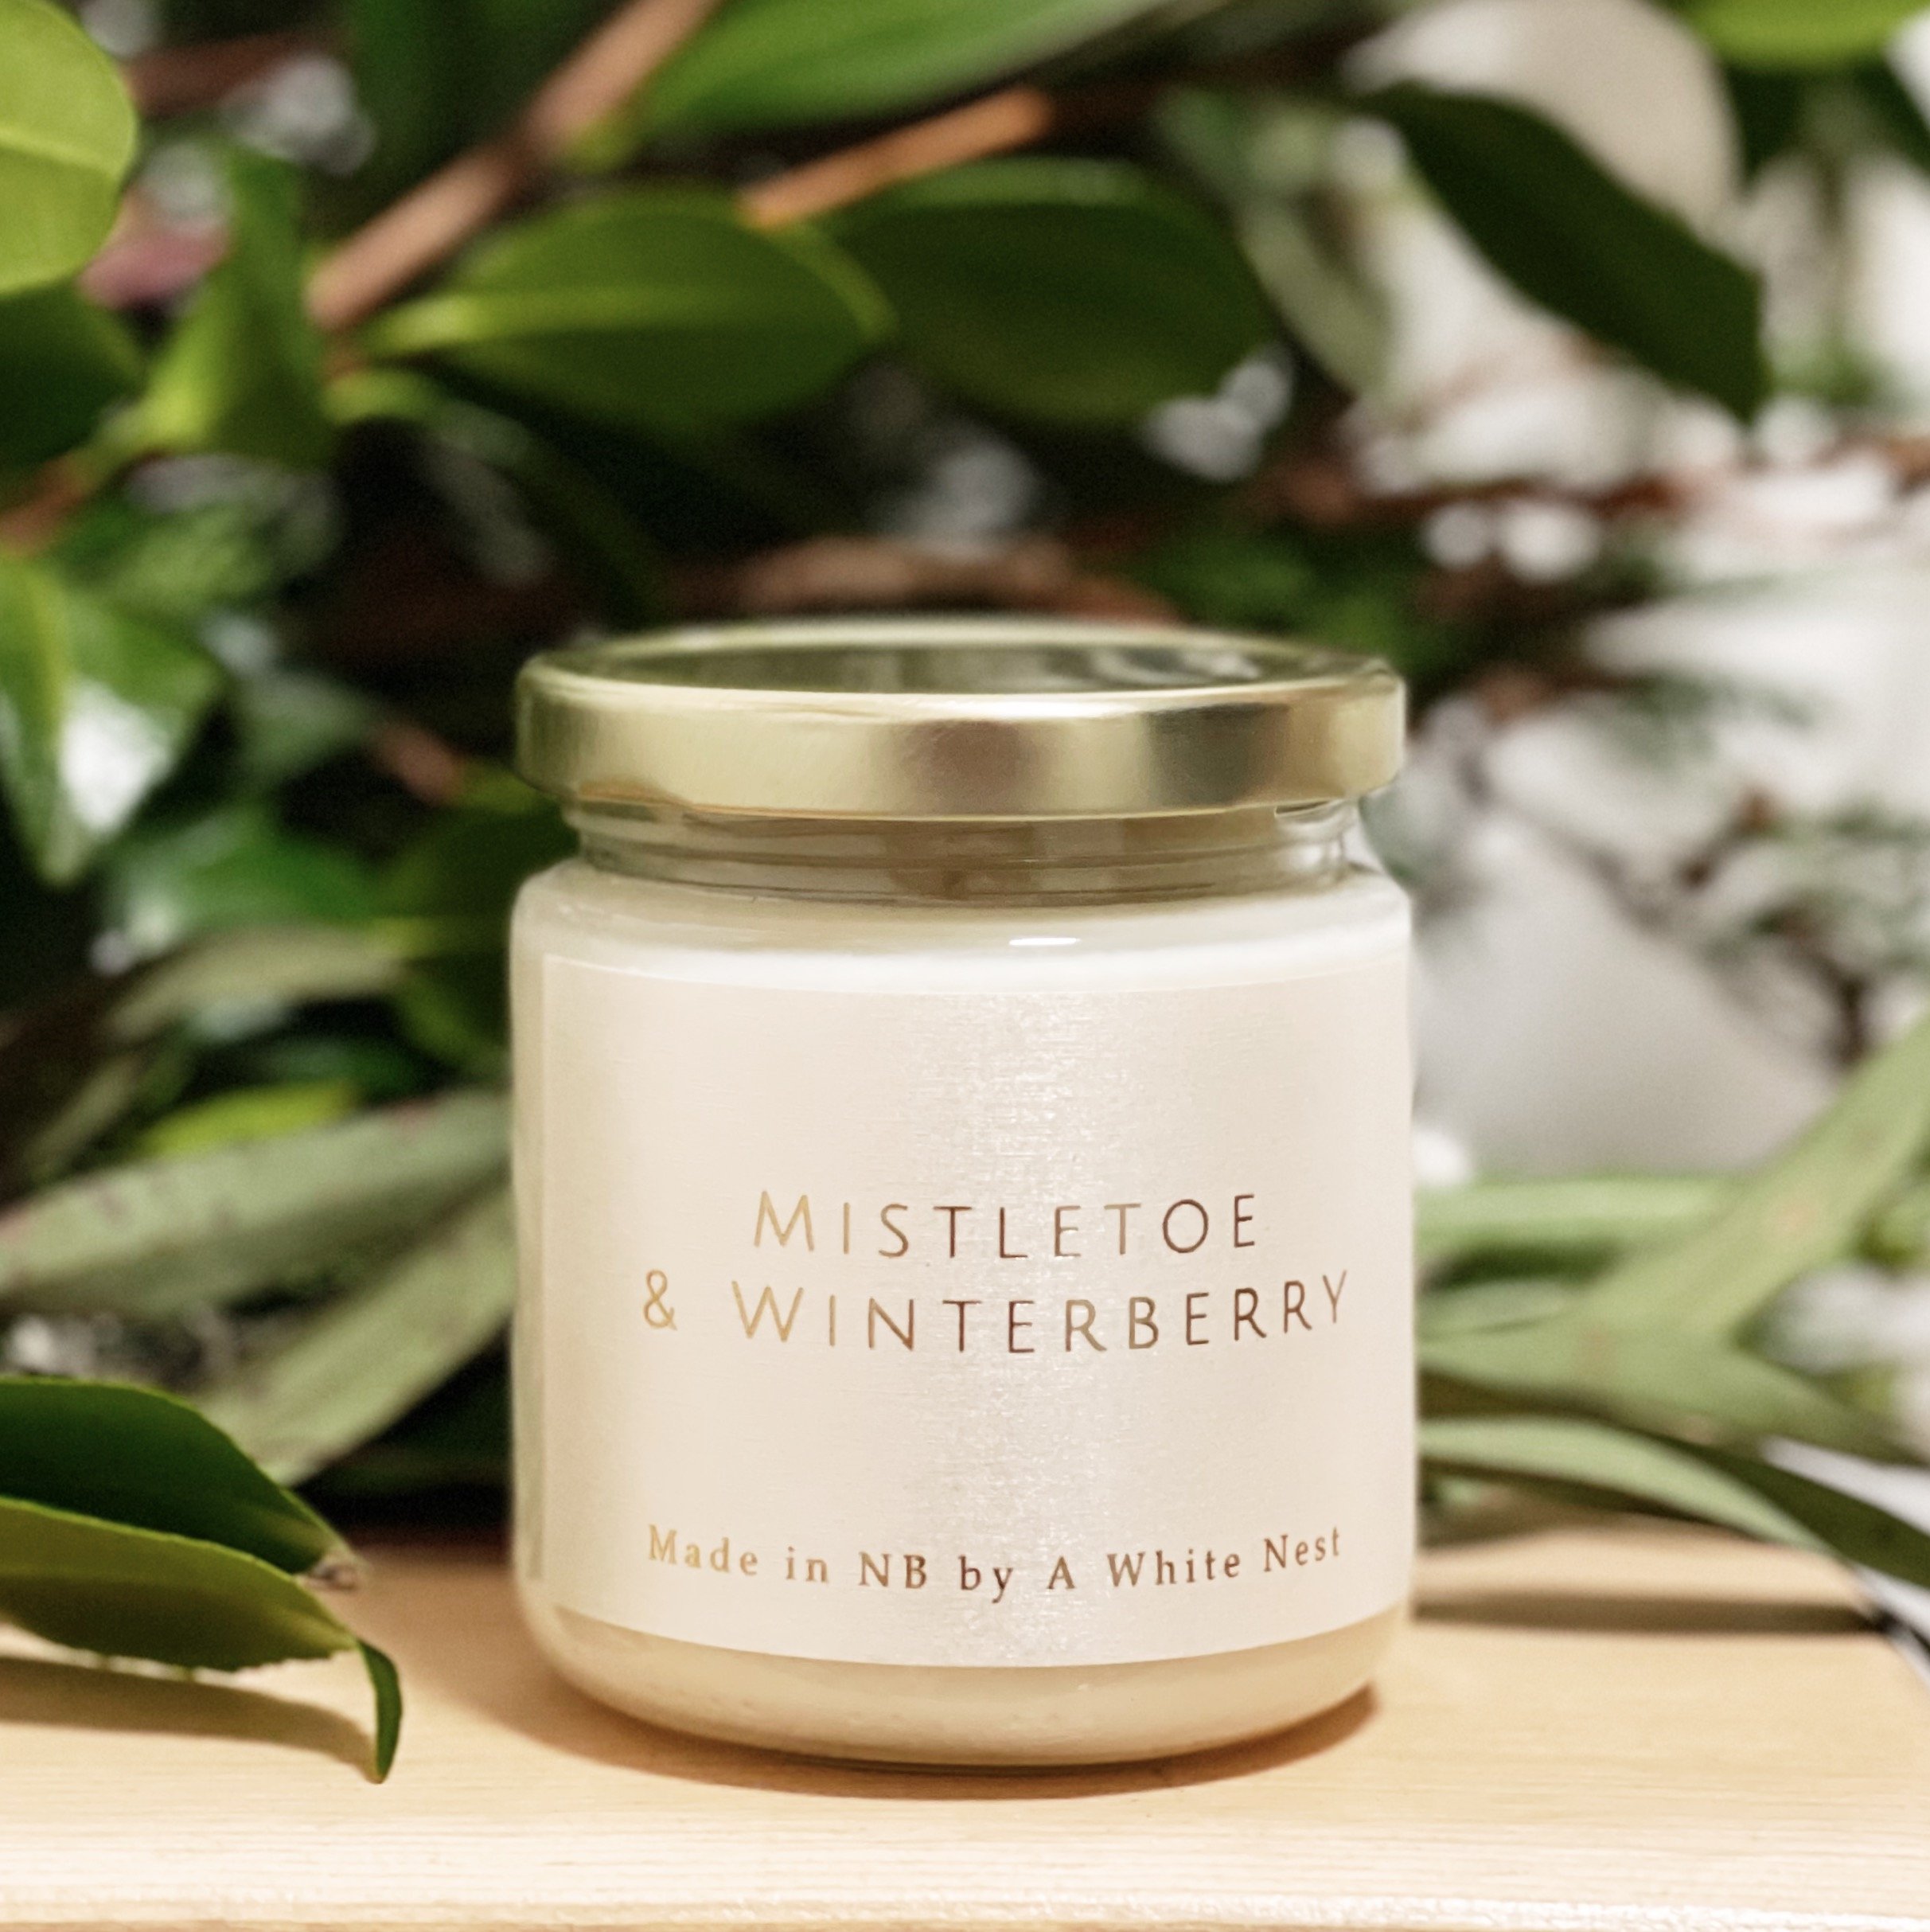 Mistletoe &amp; Winterberry Scented Candle - $20.00